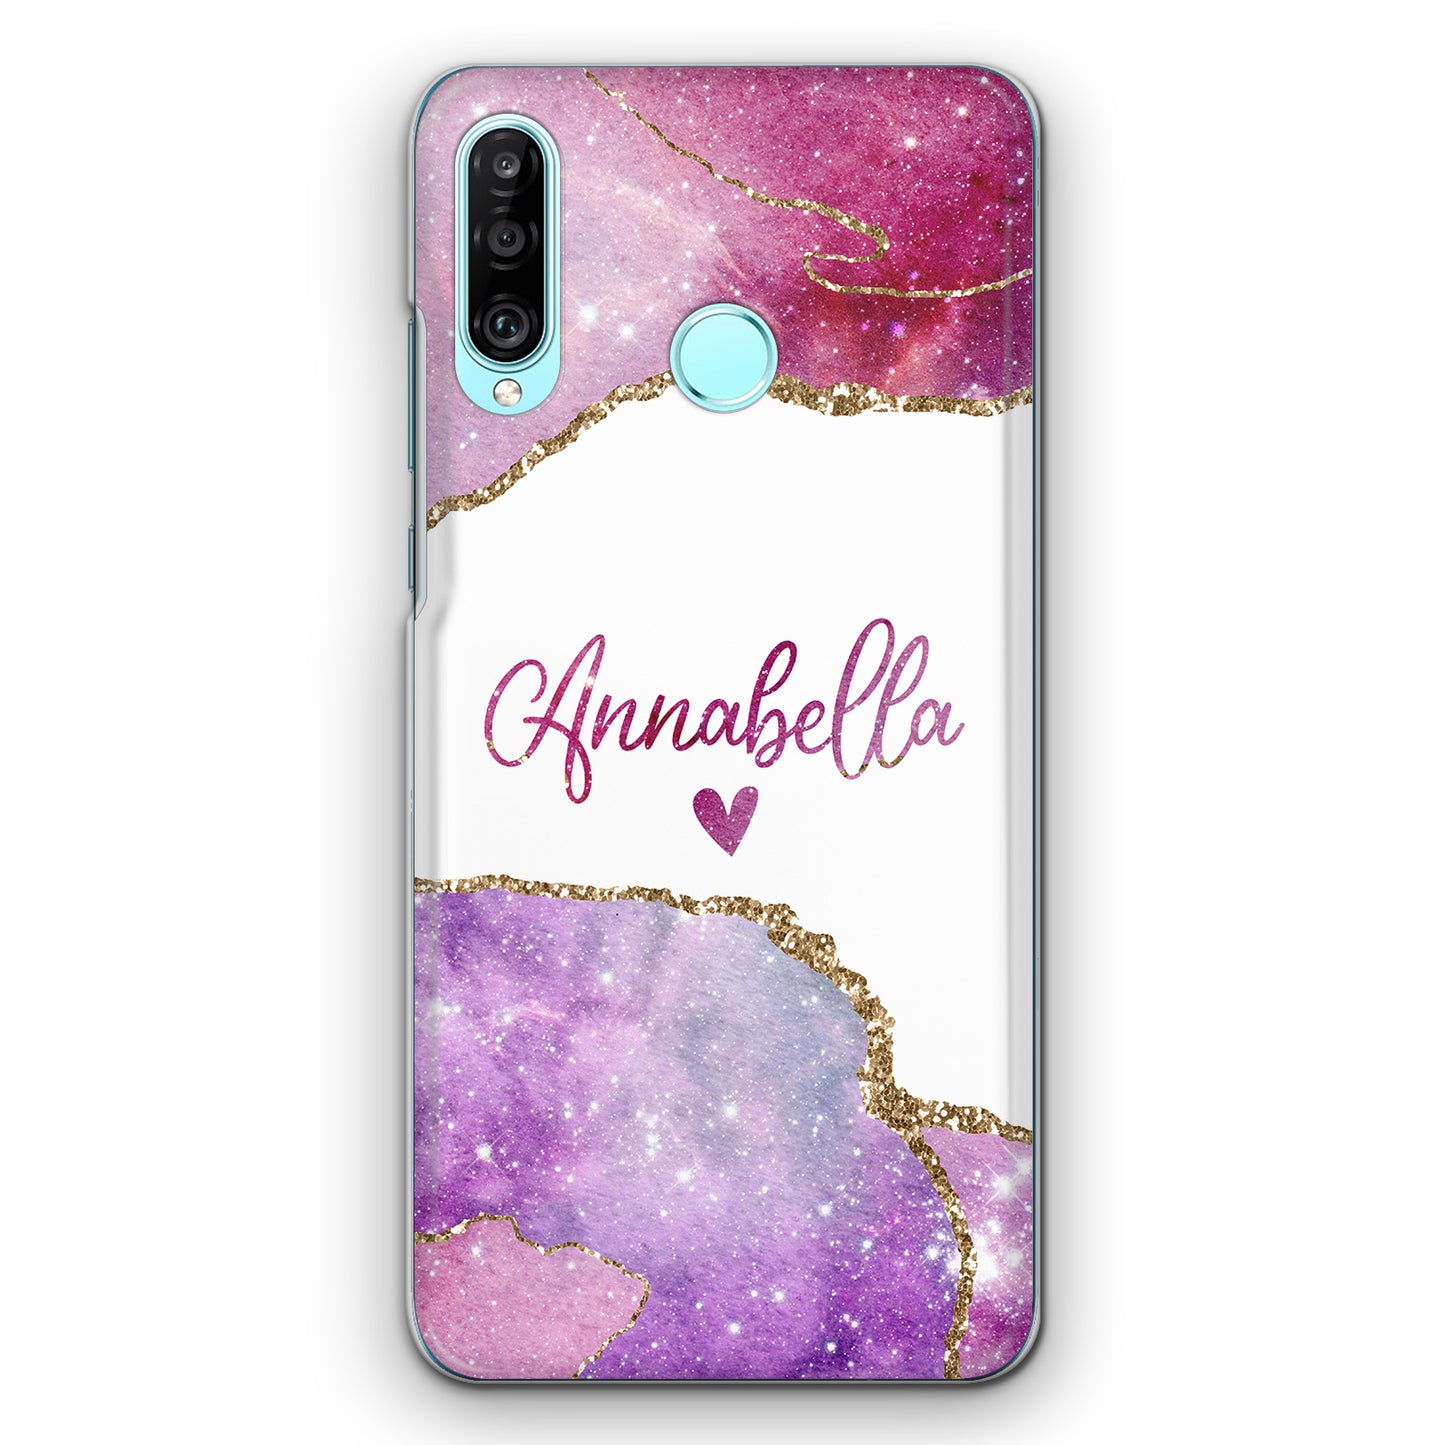 Personalised Motorola Phone Hard Case with Heart Accented Text on Rose Pink Marble